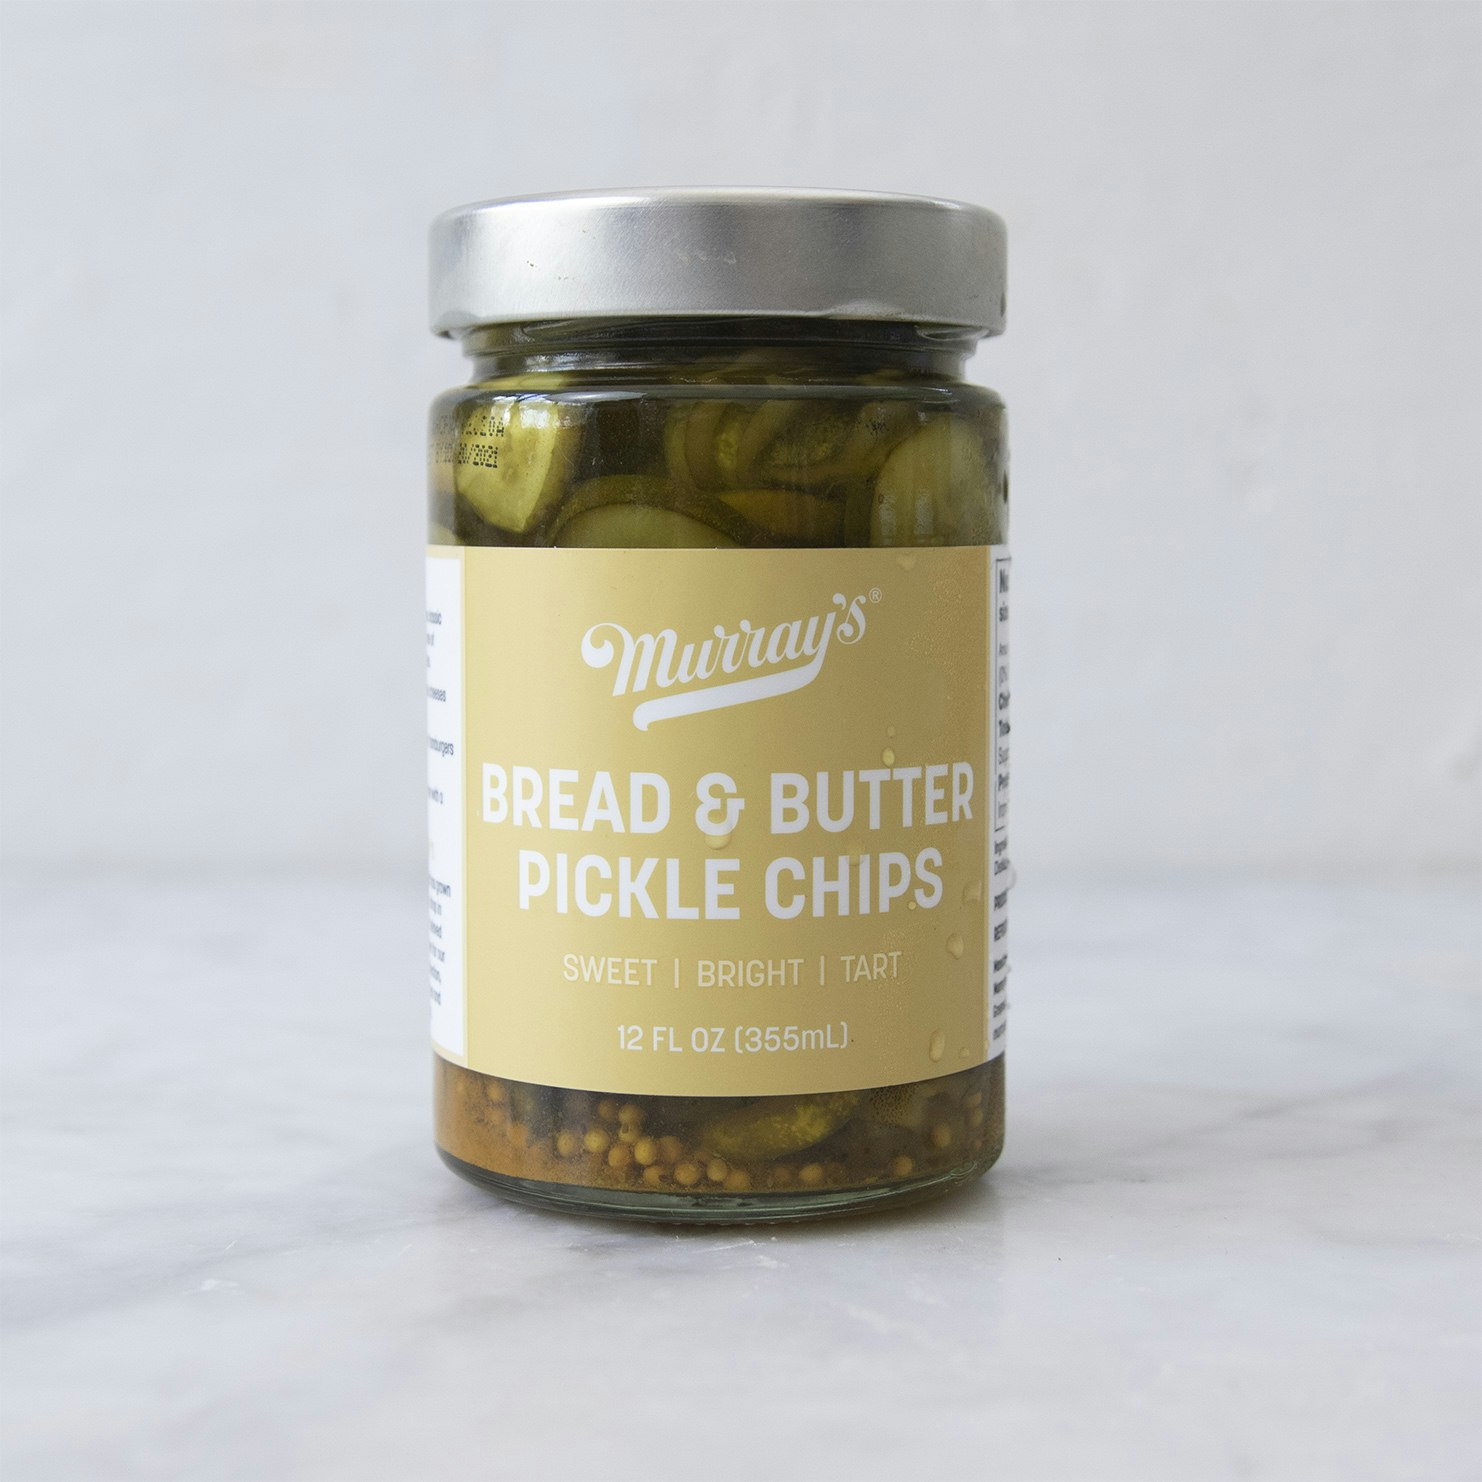 murrays bread butter pickle chips specialty foods